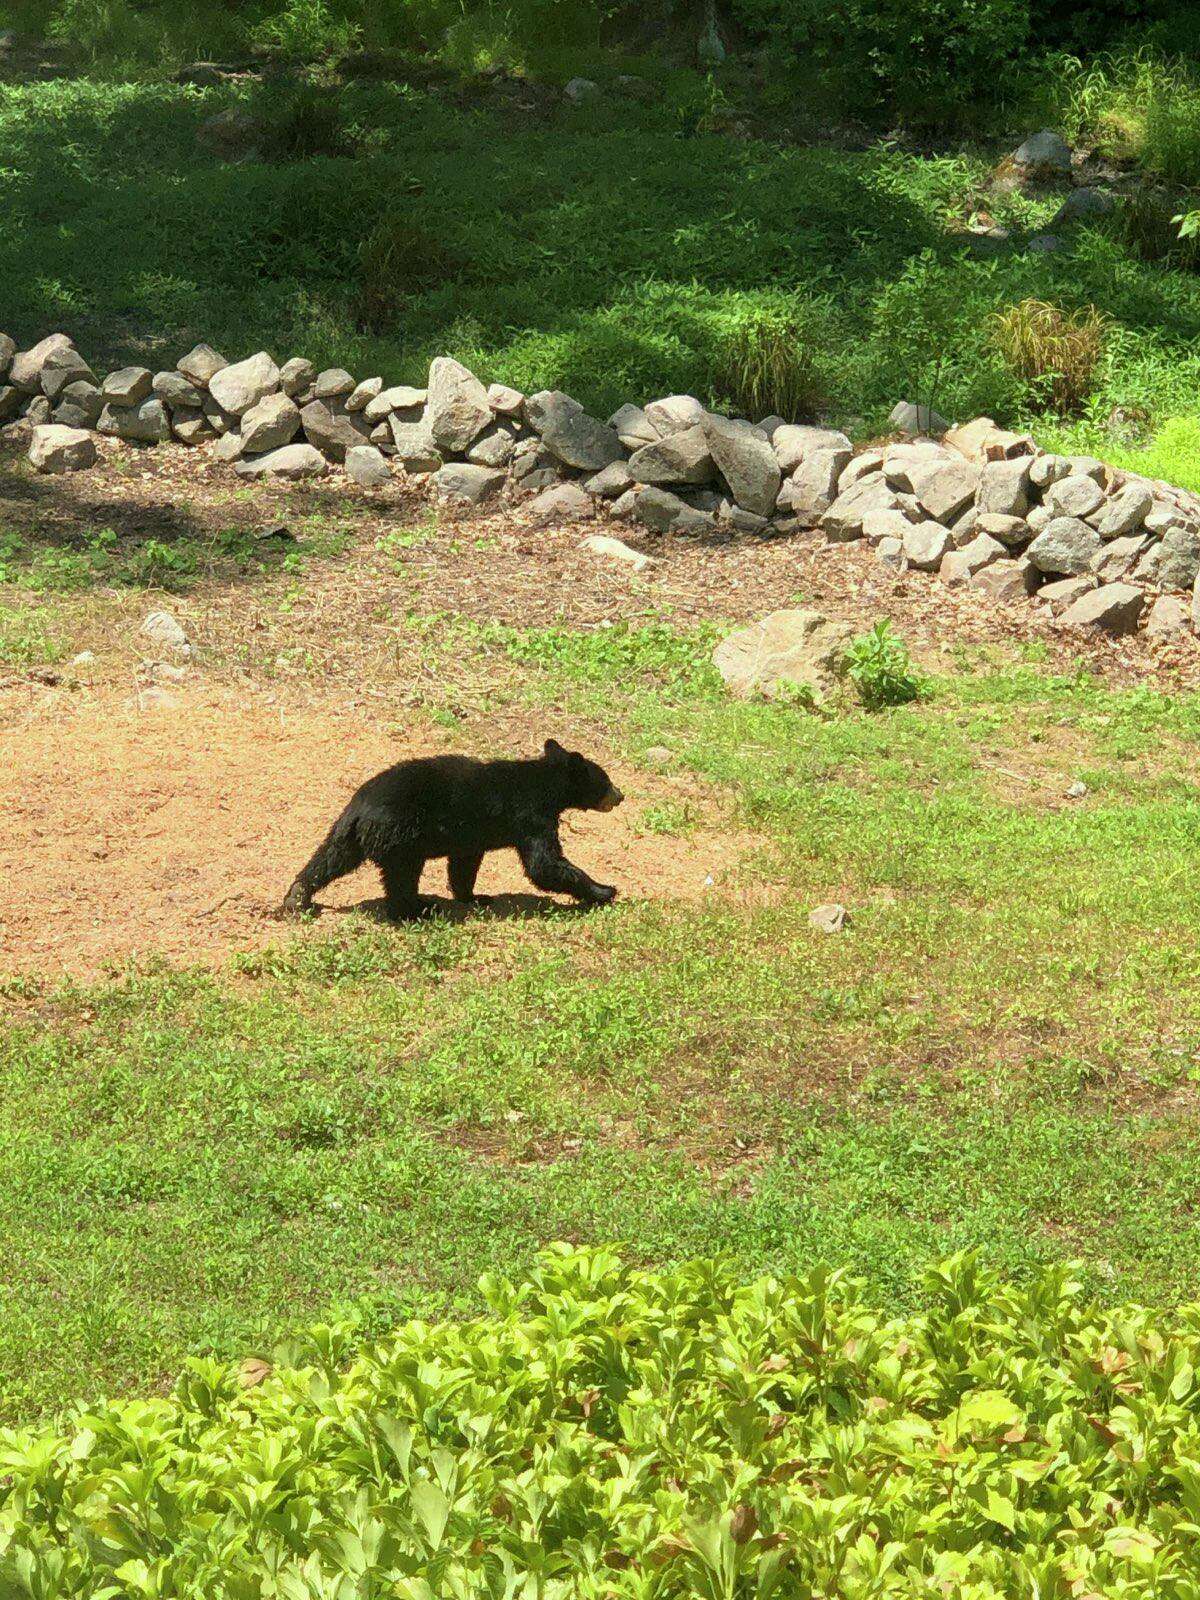 A baby black bear in the backyard of New Canaan resident Susan Serven's neighbor at 174 Mariomi Road last year. Serven's neighbors who live at the mentioned address are John and Jennifer Ruth.